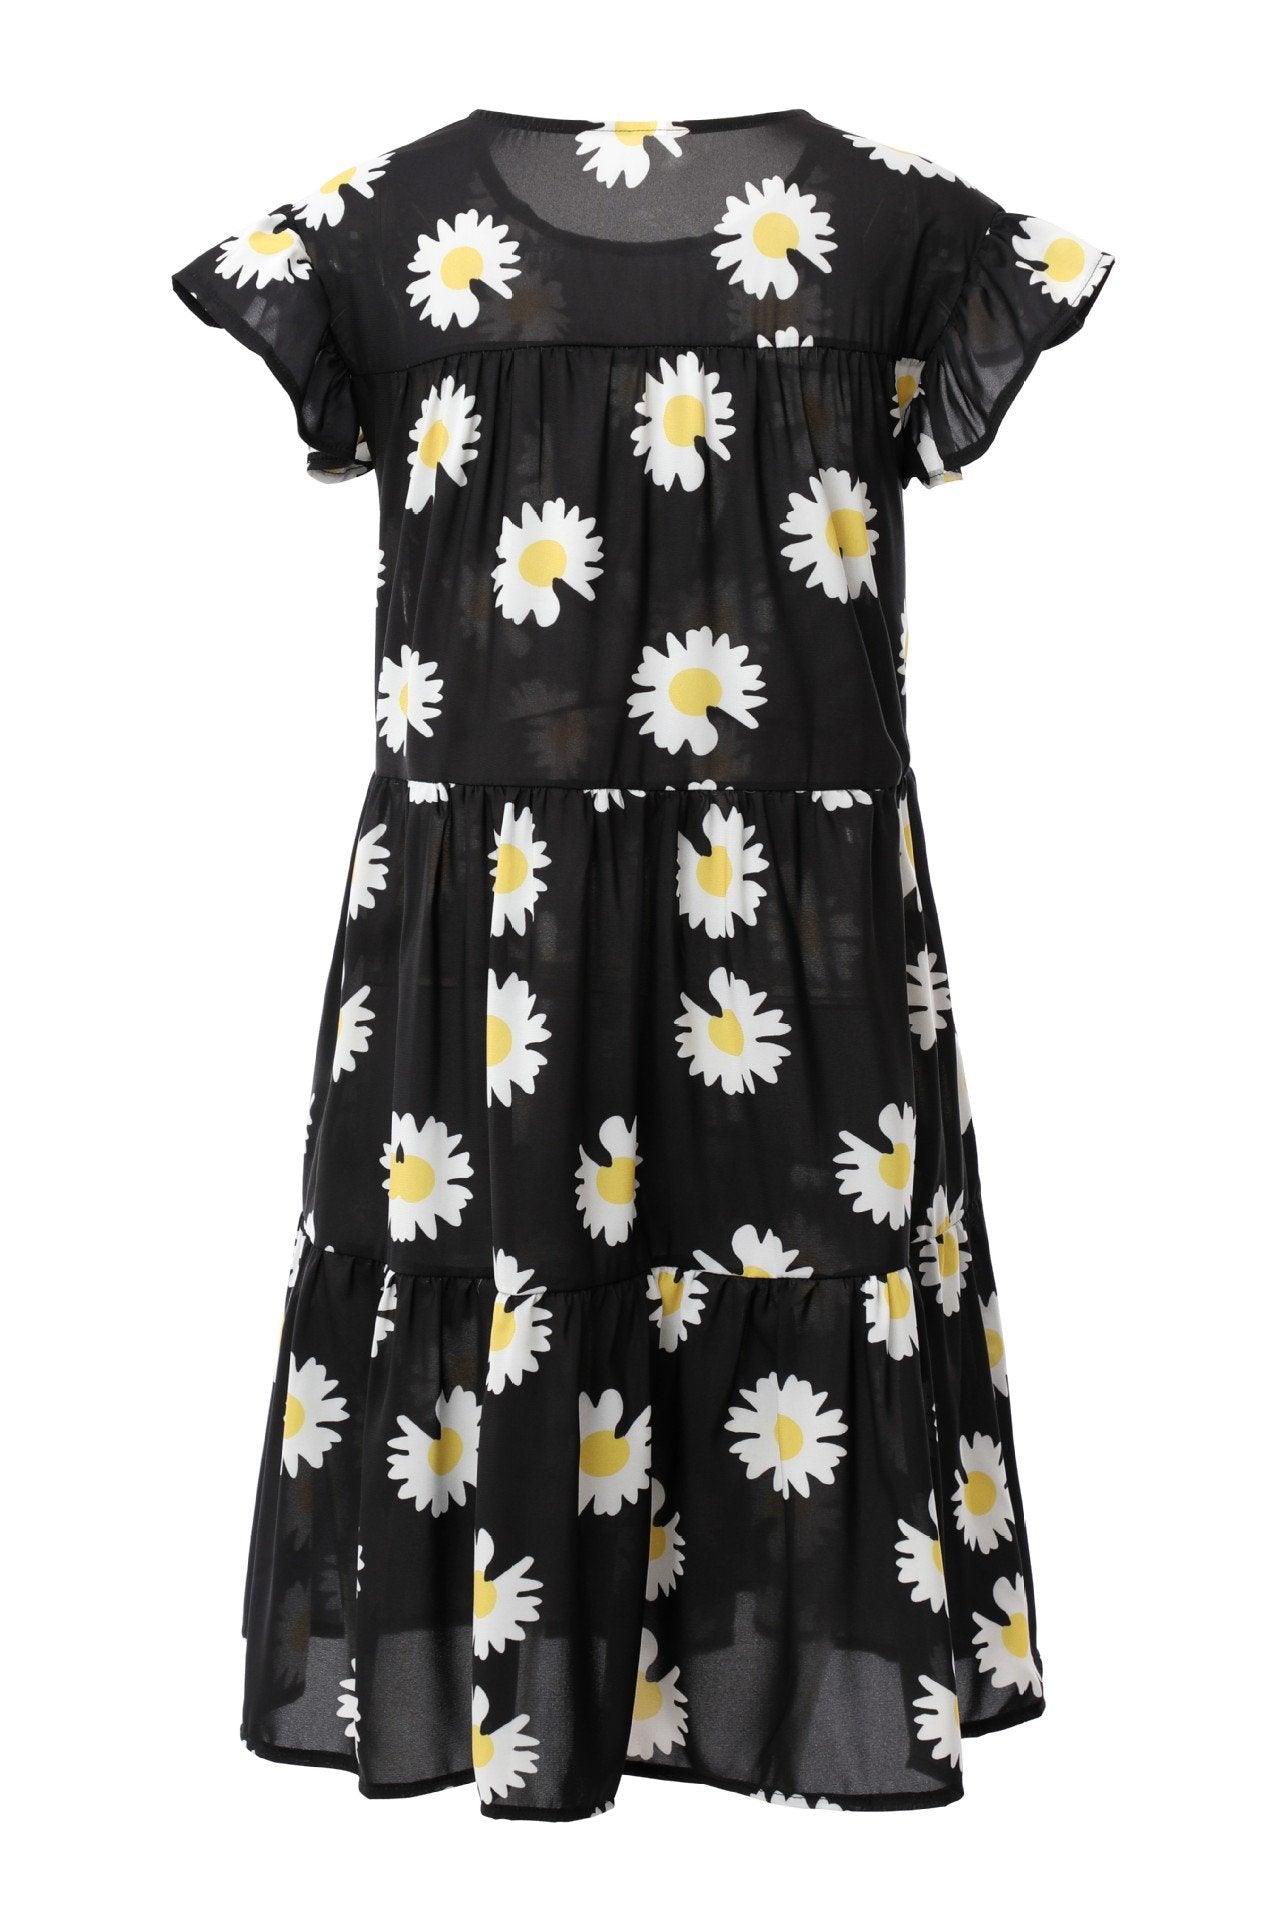 Sweety Floral Print A Line Dresses--Free Shipping at meselling99